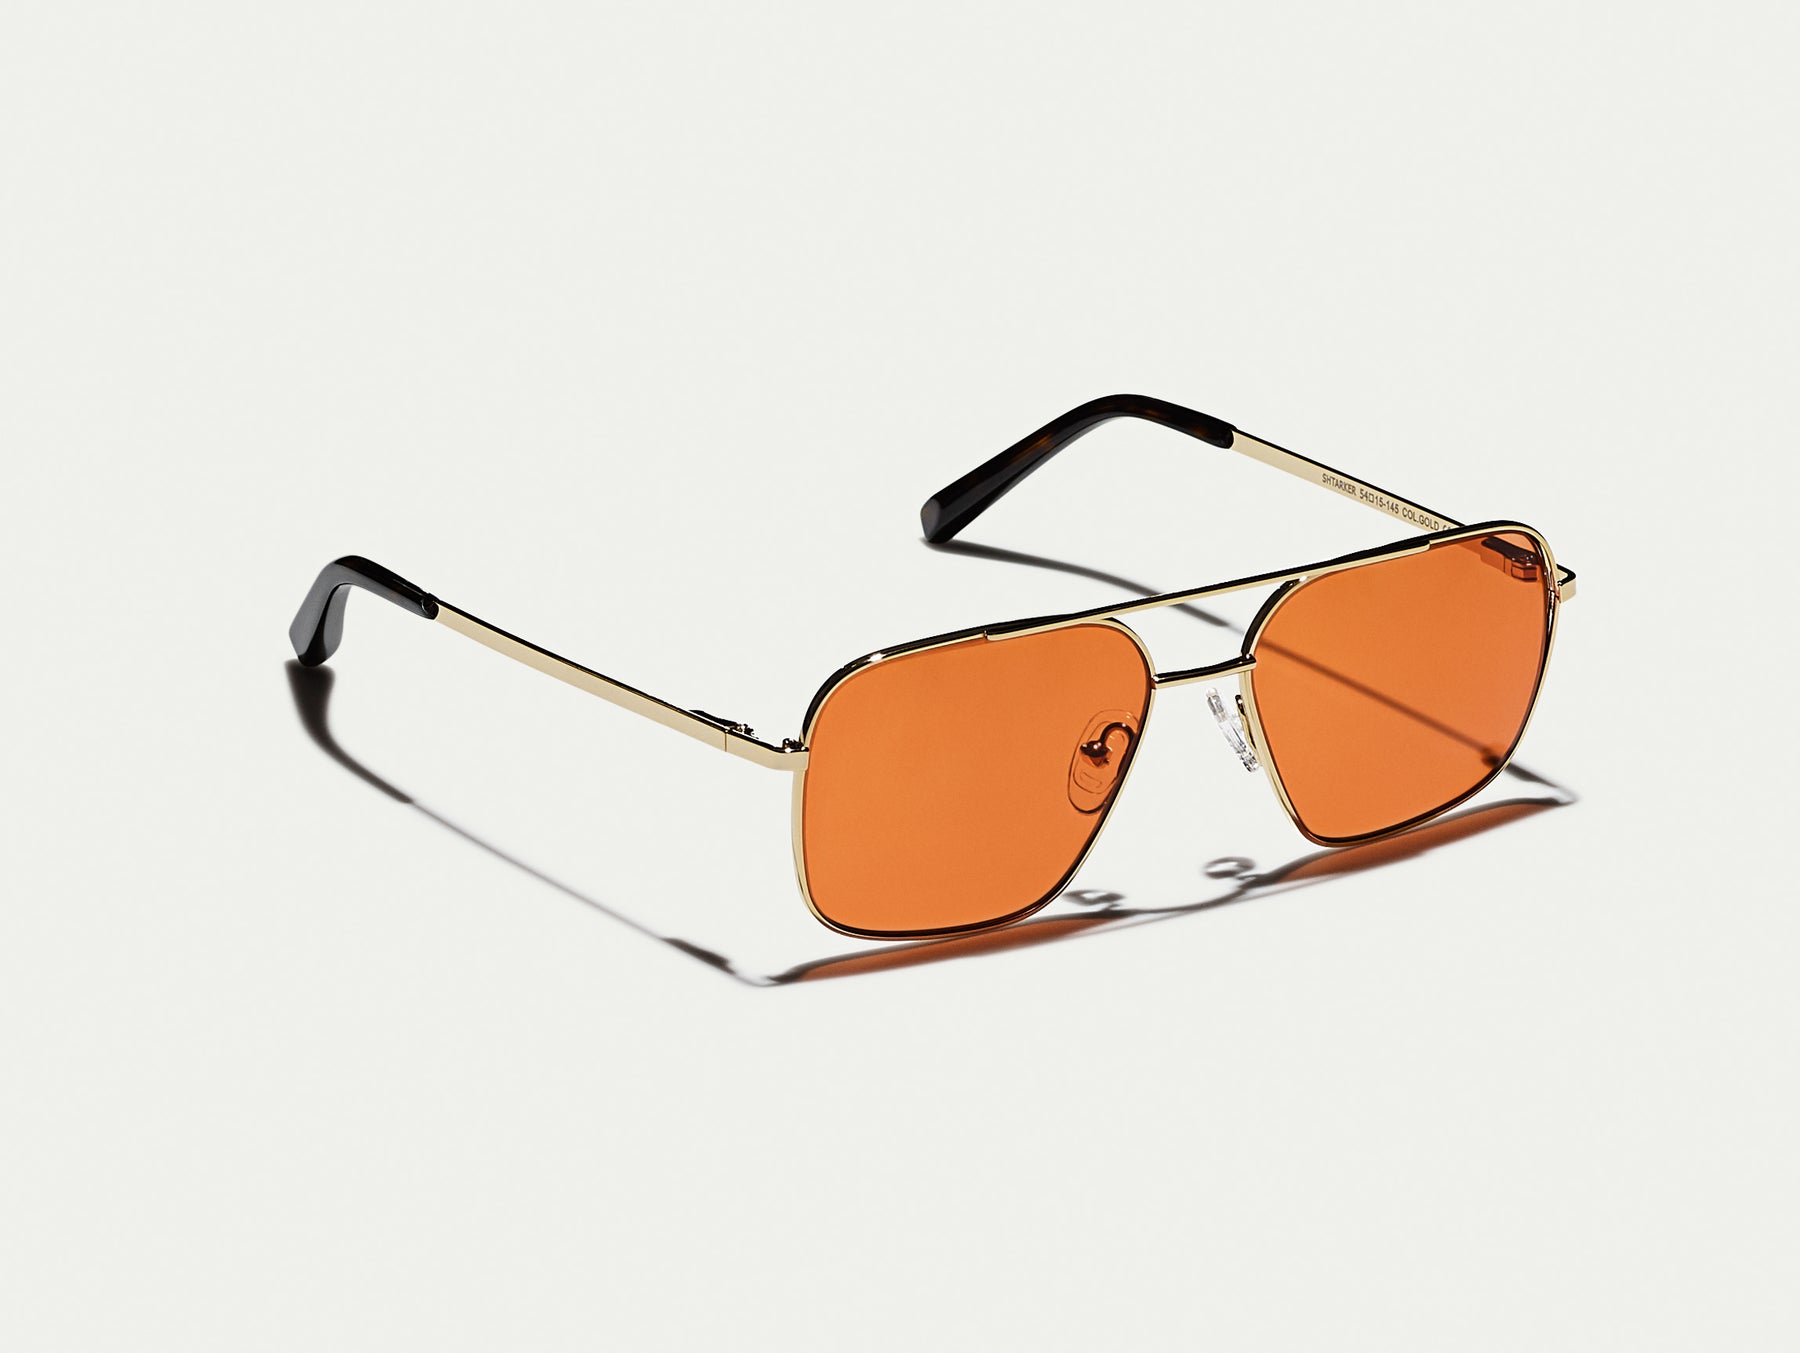 The SHTARKER in Gold with Woodstock Orange Tinted Lenses